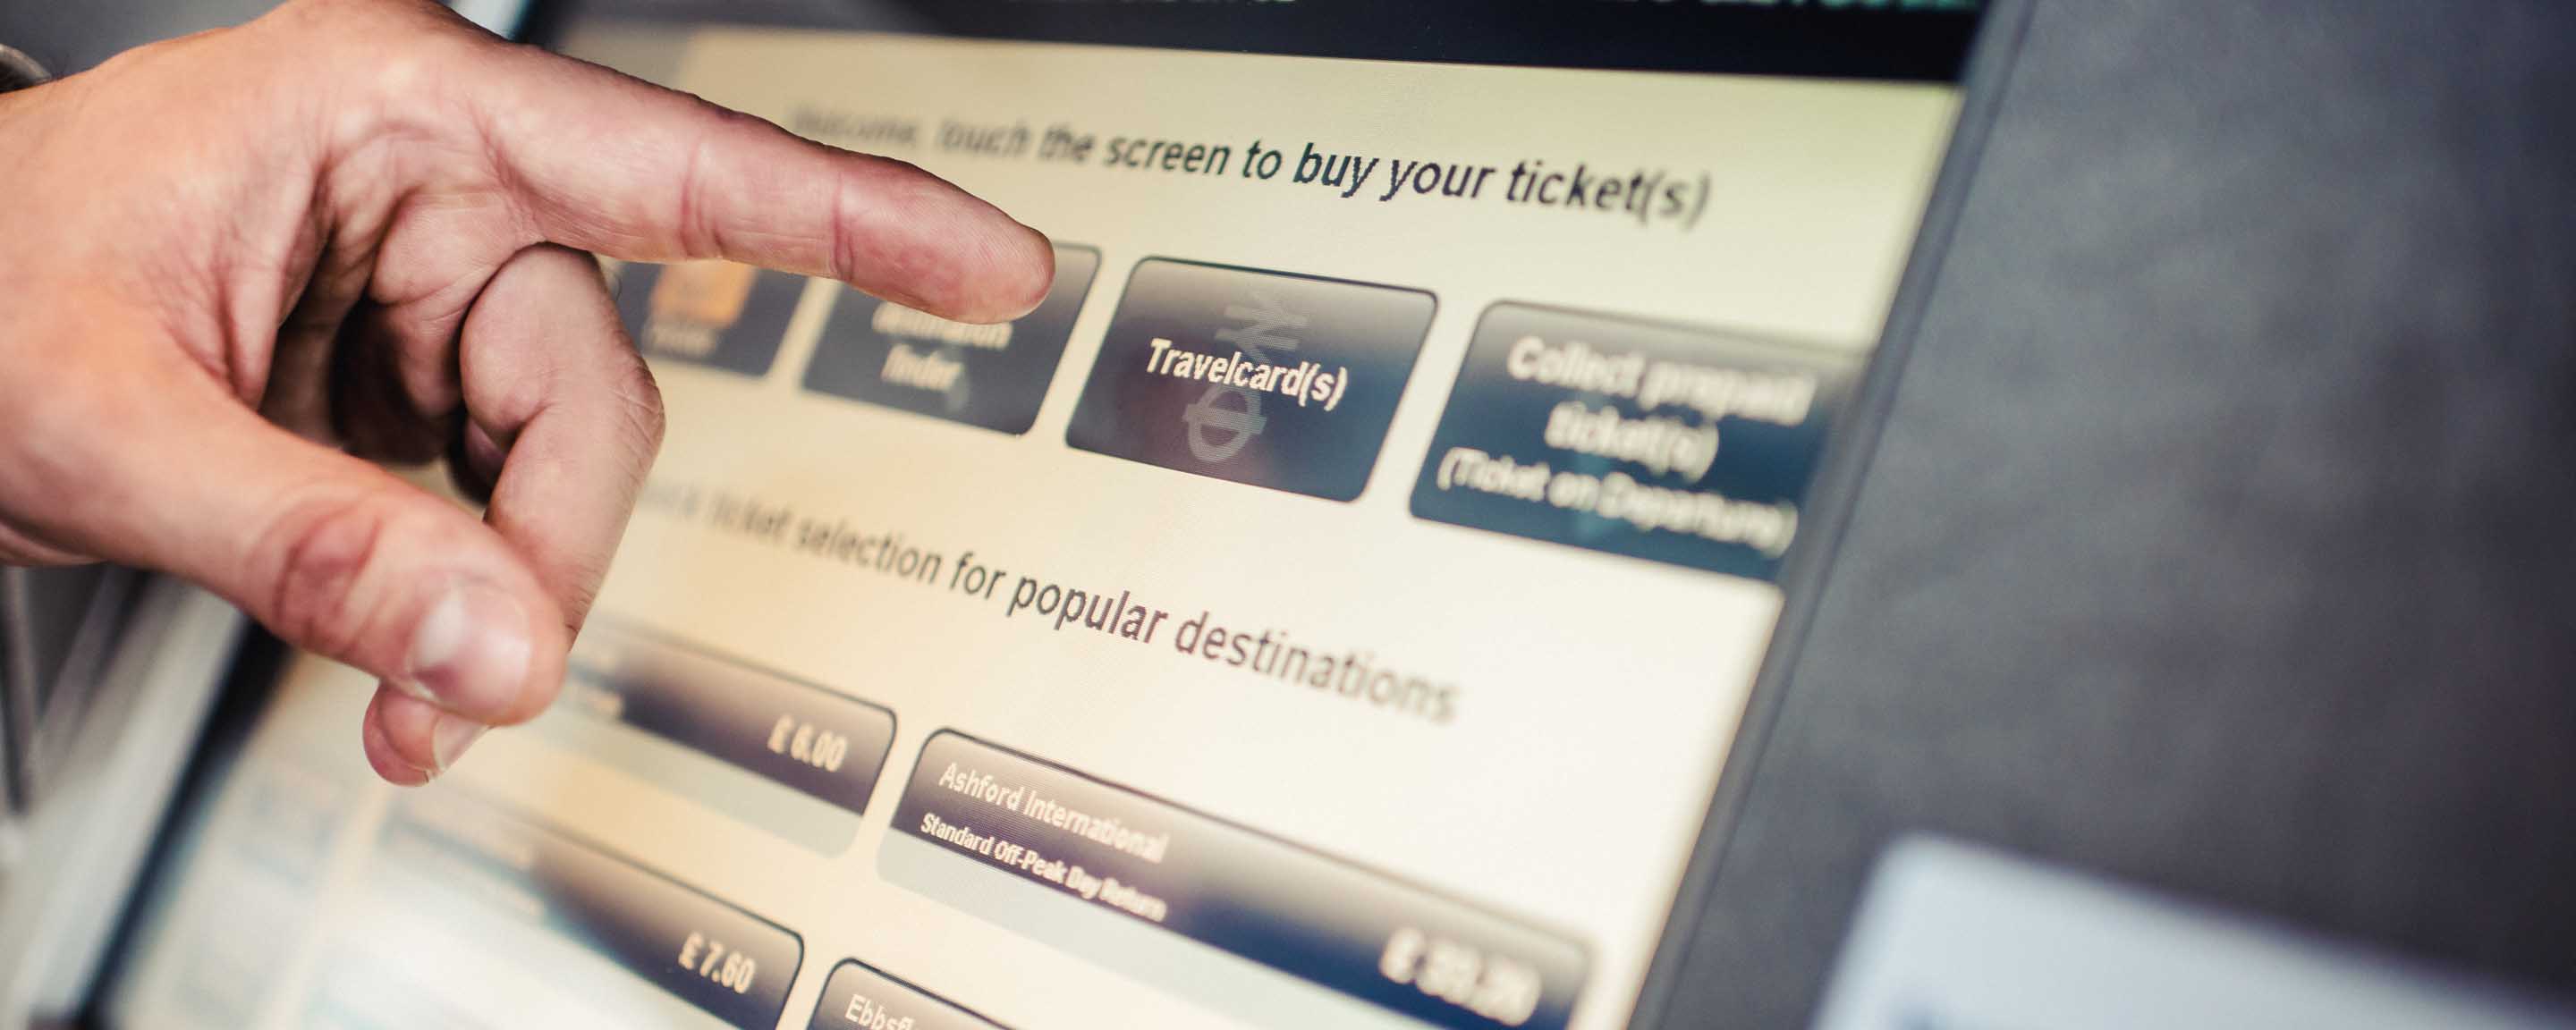 Hand tapping on a ticket screen